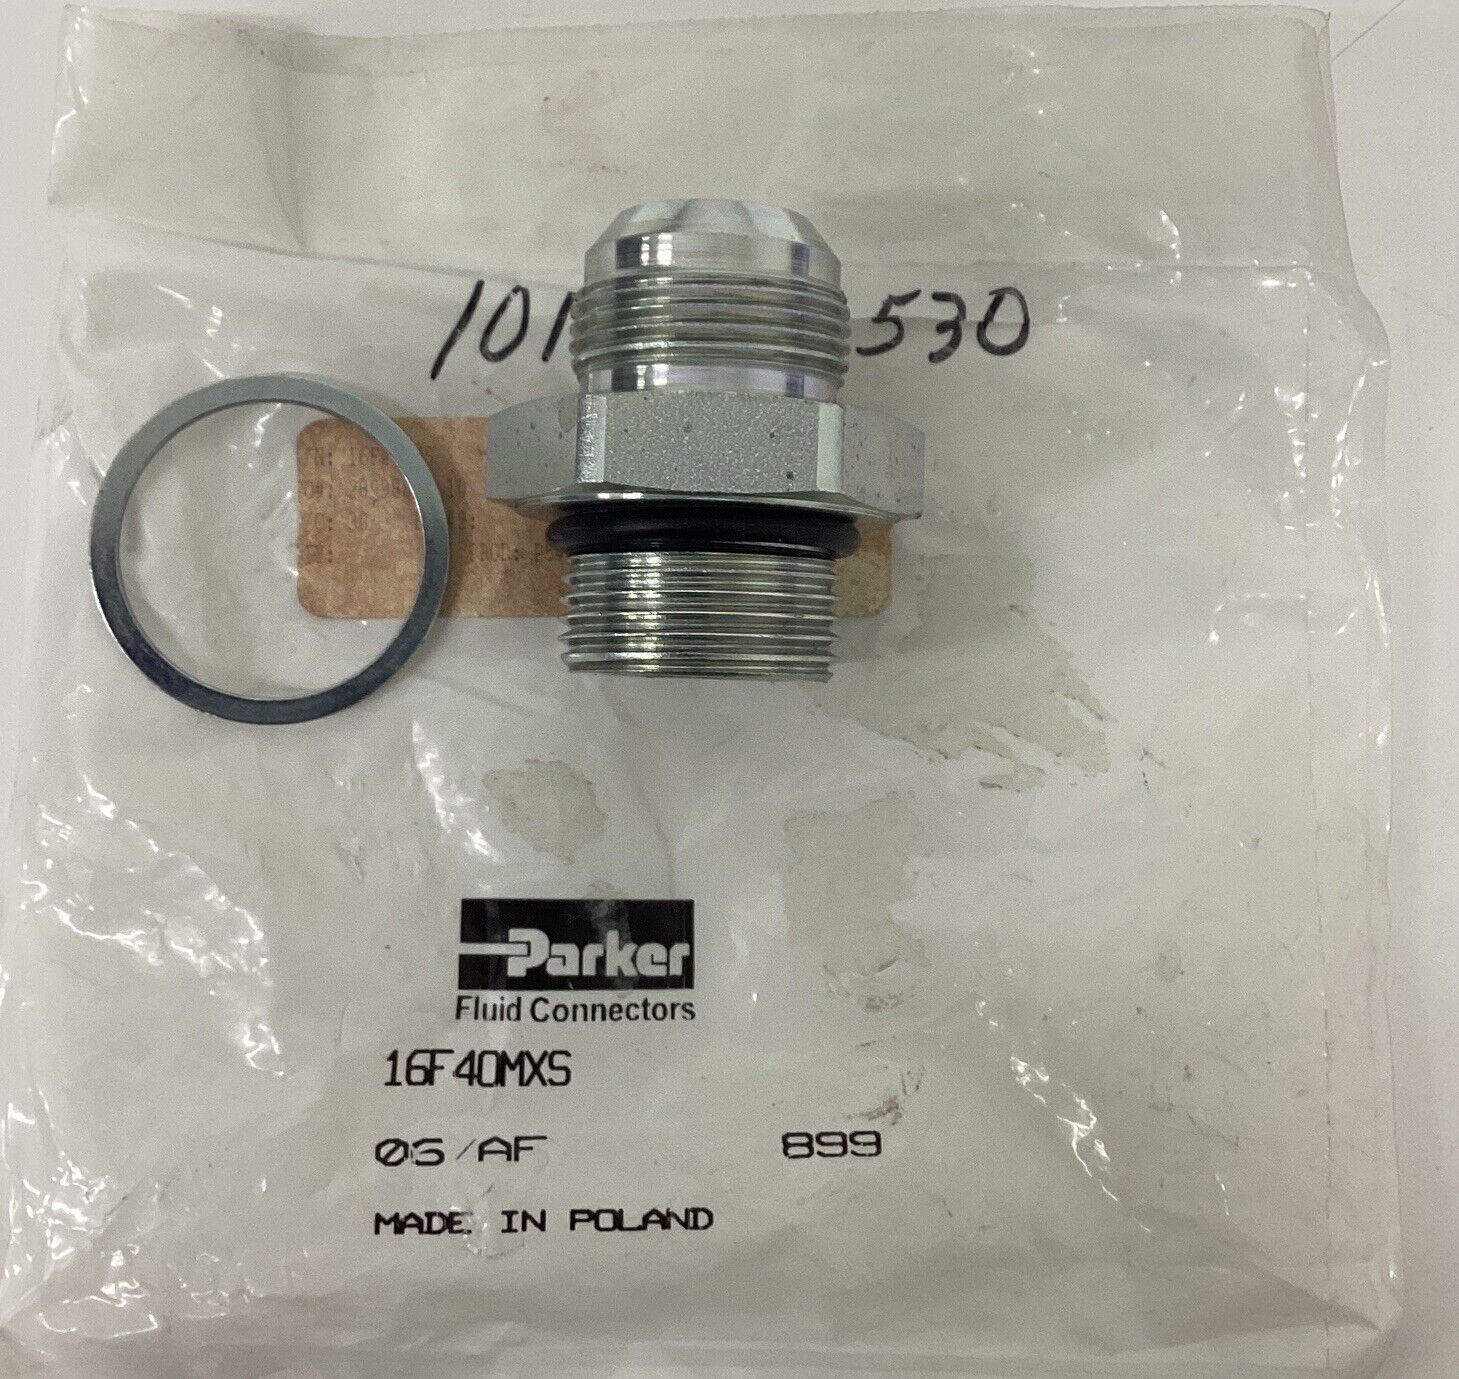 Parker 16F40MXS Hydraulic Fluid Connector (BL277) - 0